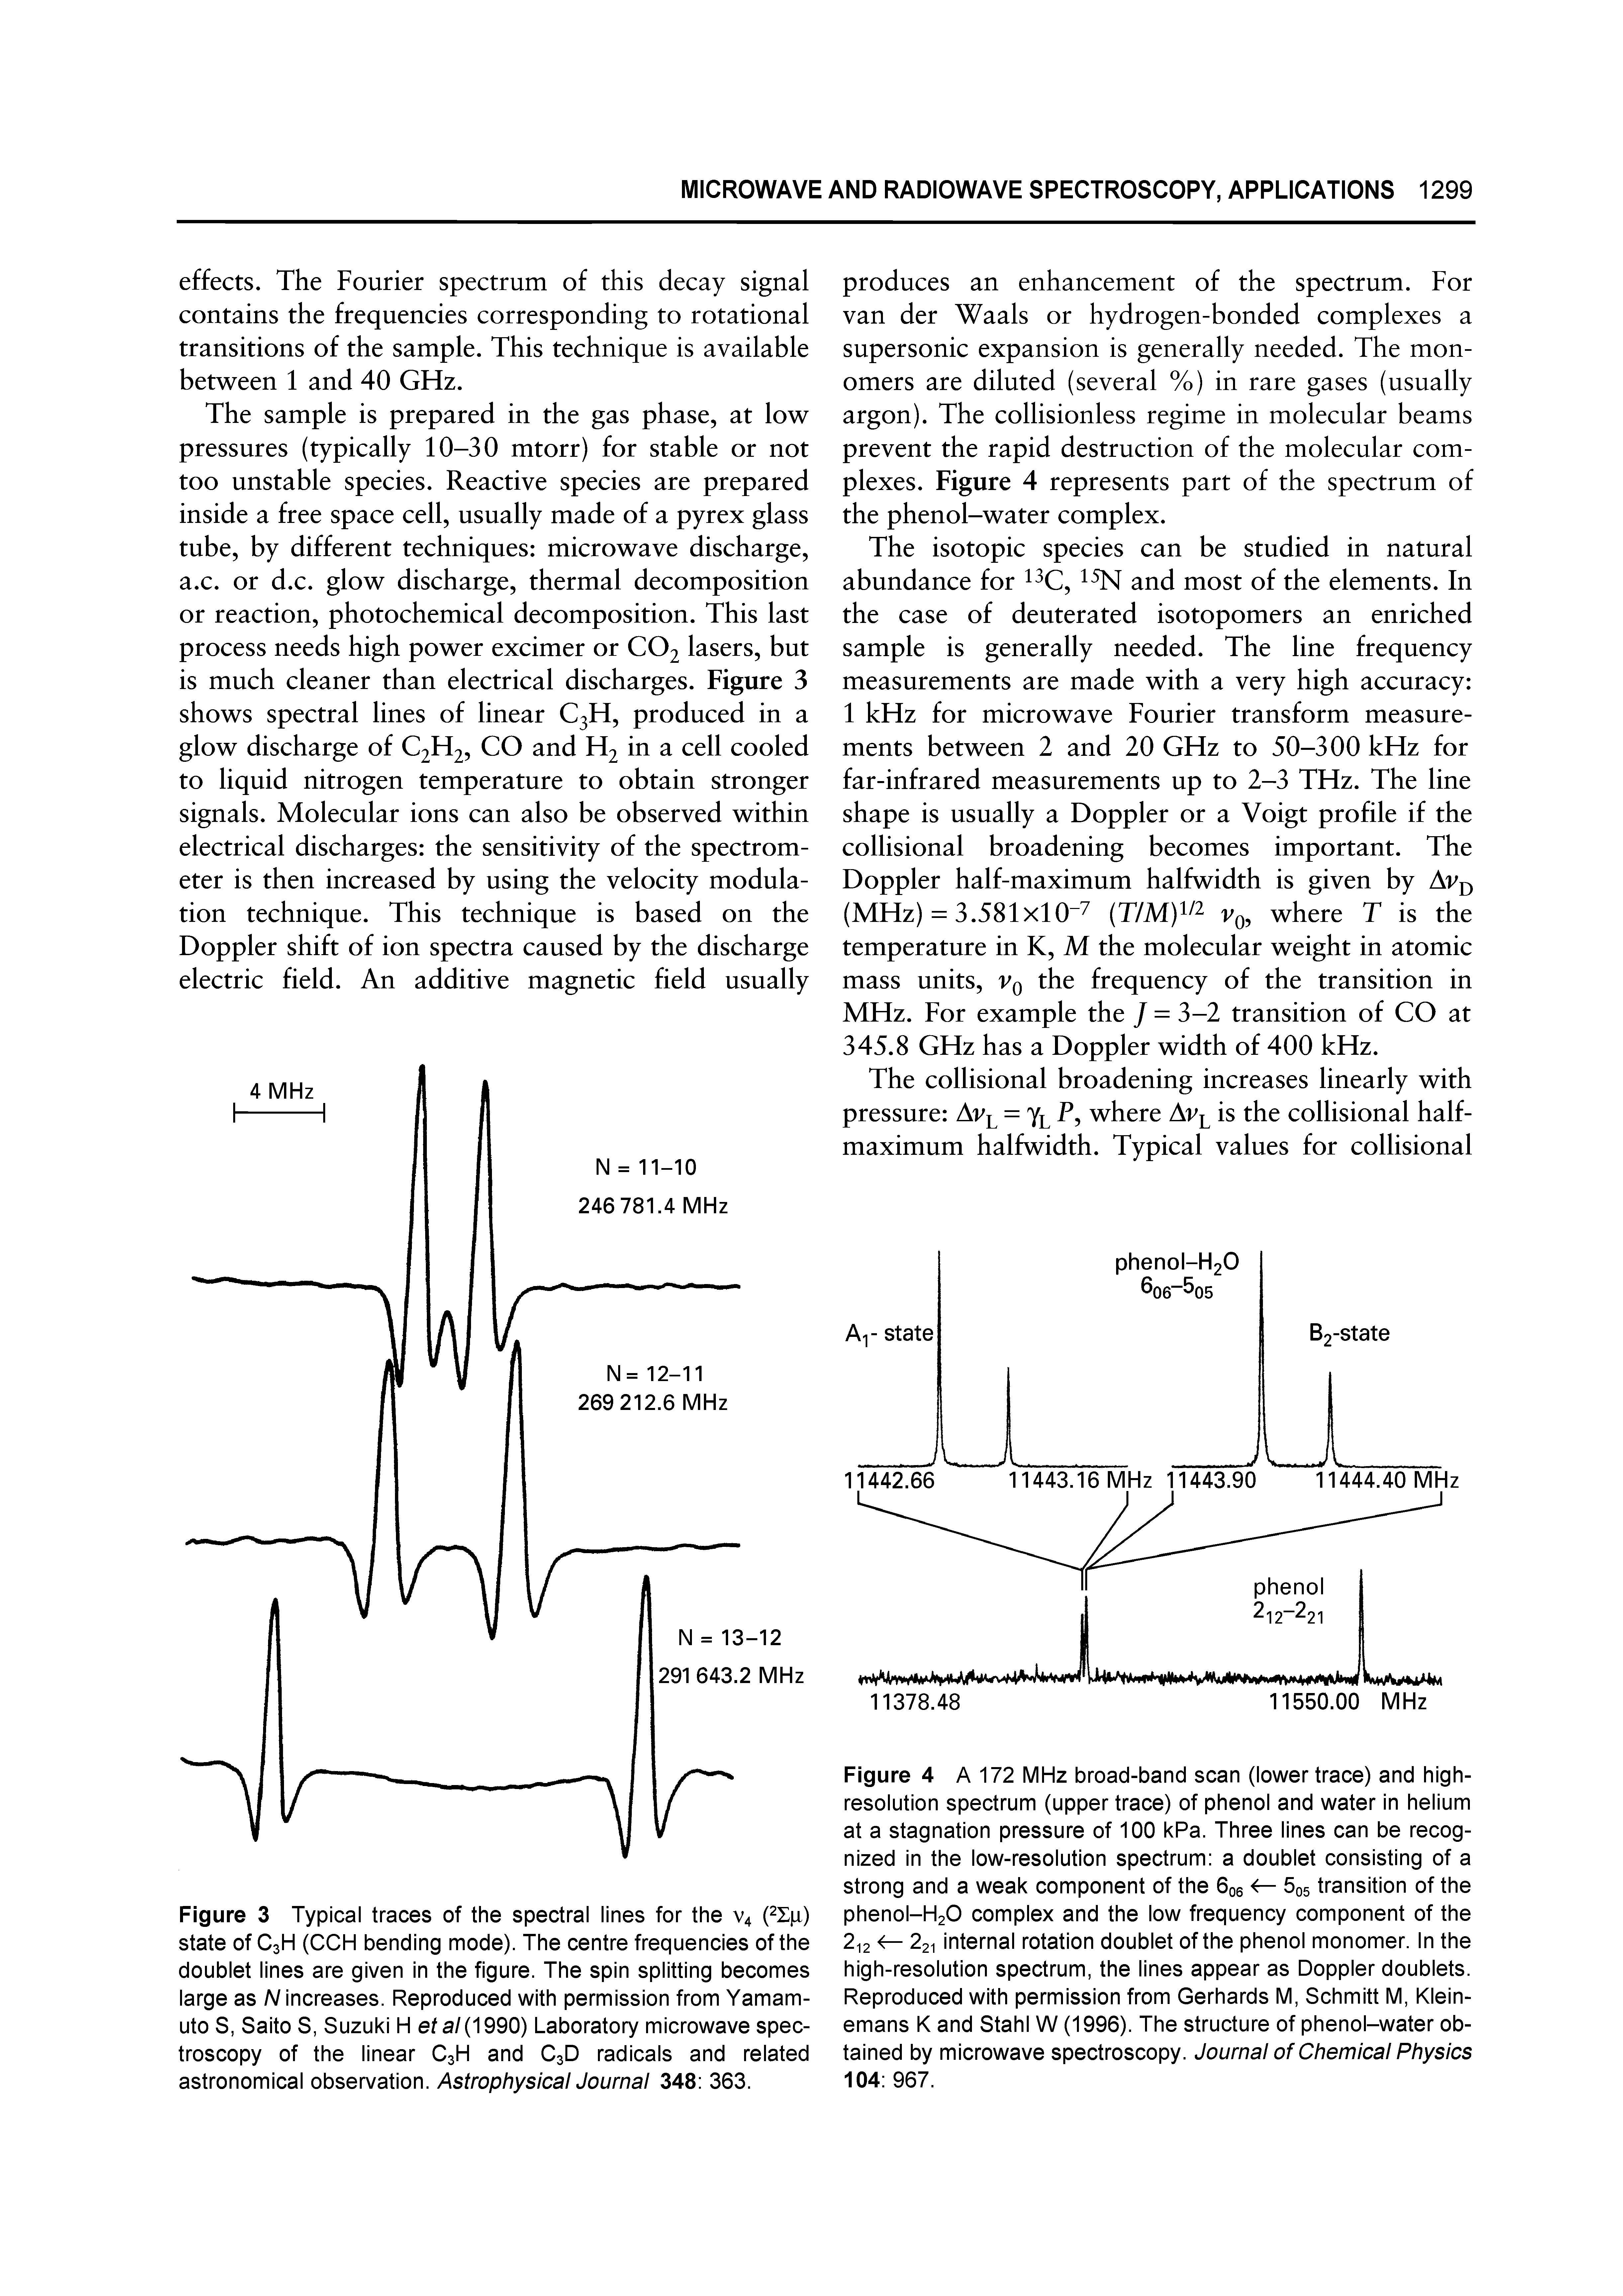 Figure 4 A 172 MHz broad-band scan (lower trace) and high-resolution spectrum (upper trace) of phenol and water in helium at a stagnation pressure of 100 kPa. Three lines can be recognized in the low-resolution spectrum a doublet consisting of a strong and a weak component of the 6oe <r- 605 transition of the phenol-H20 complex and the low frequency component of the 2i2 221 internal rotation doublet of the phenol monomer. In the high-resolution spectrum, the lines appear as Doppler doublets. Reproduced with permission from Gerhards M, Schmitt M, Klein-emans K and Stahl W (1996). The structure of phenol-water obtained by microwave spectroscopy. Journal of Chemical Physics 104 967.